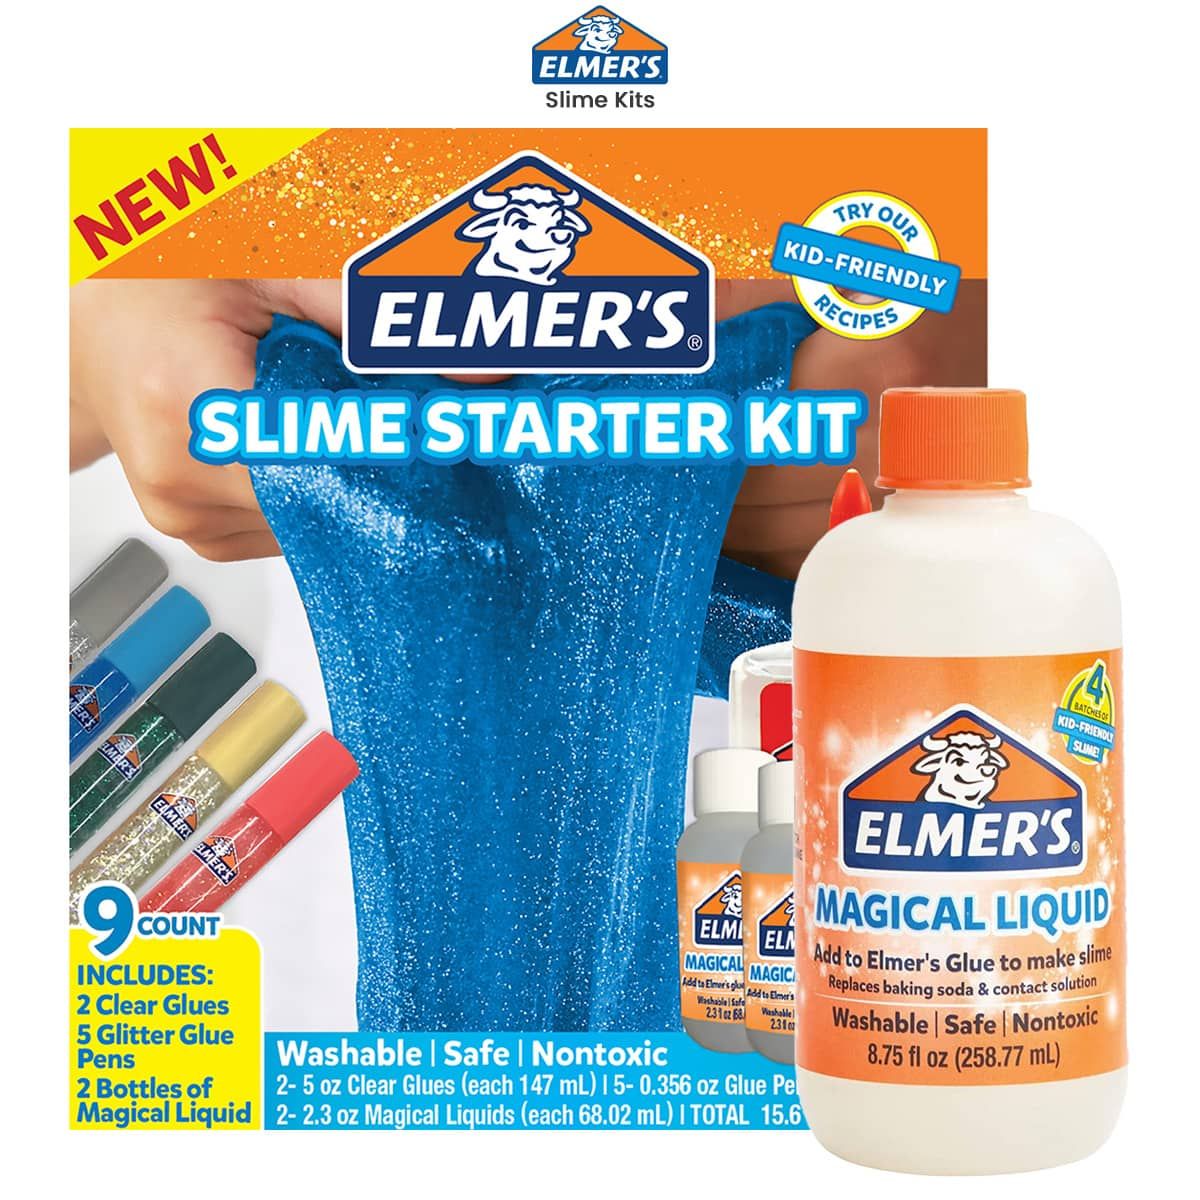 Make your own Glitter Slime XL